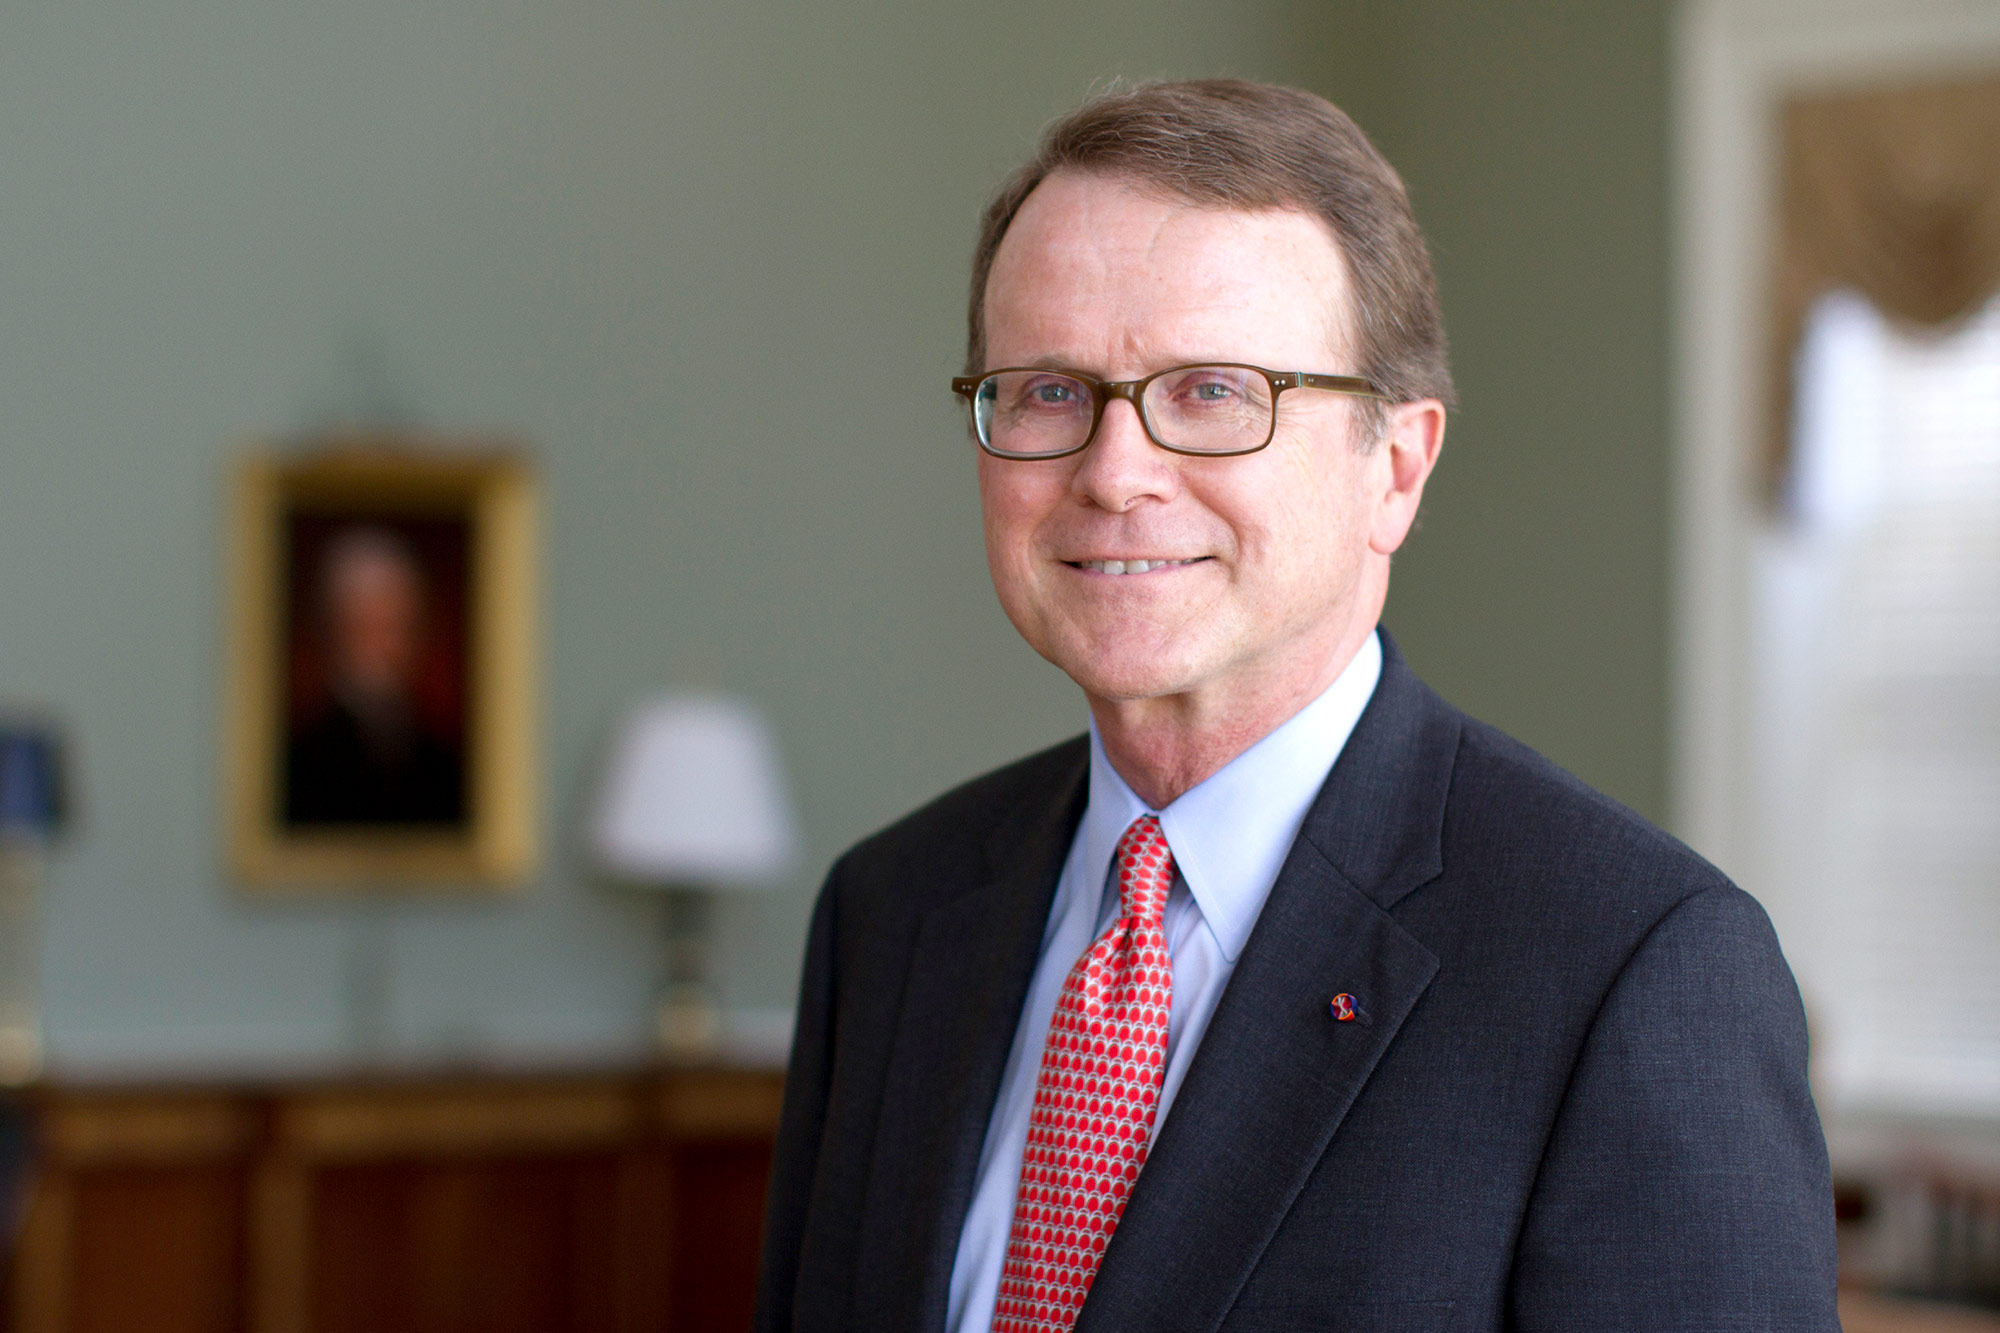 Robert F. Bruner served as Darden’s dean for 10 years before returning to the faculty. 